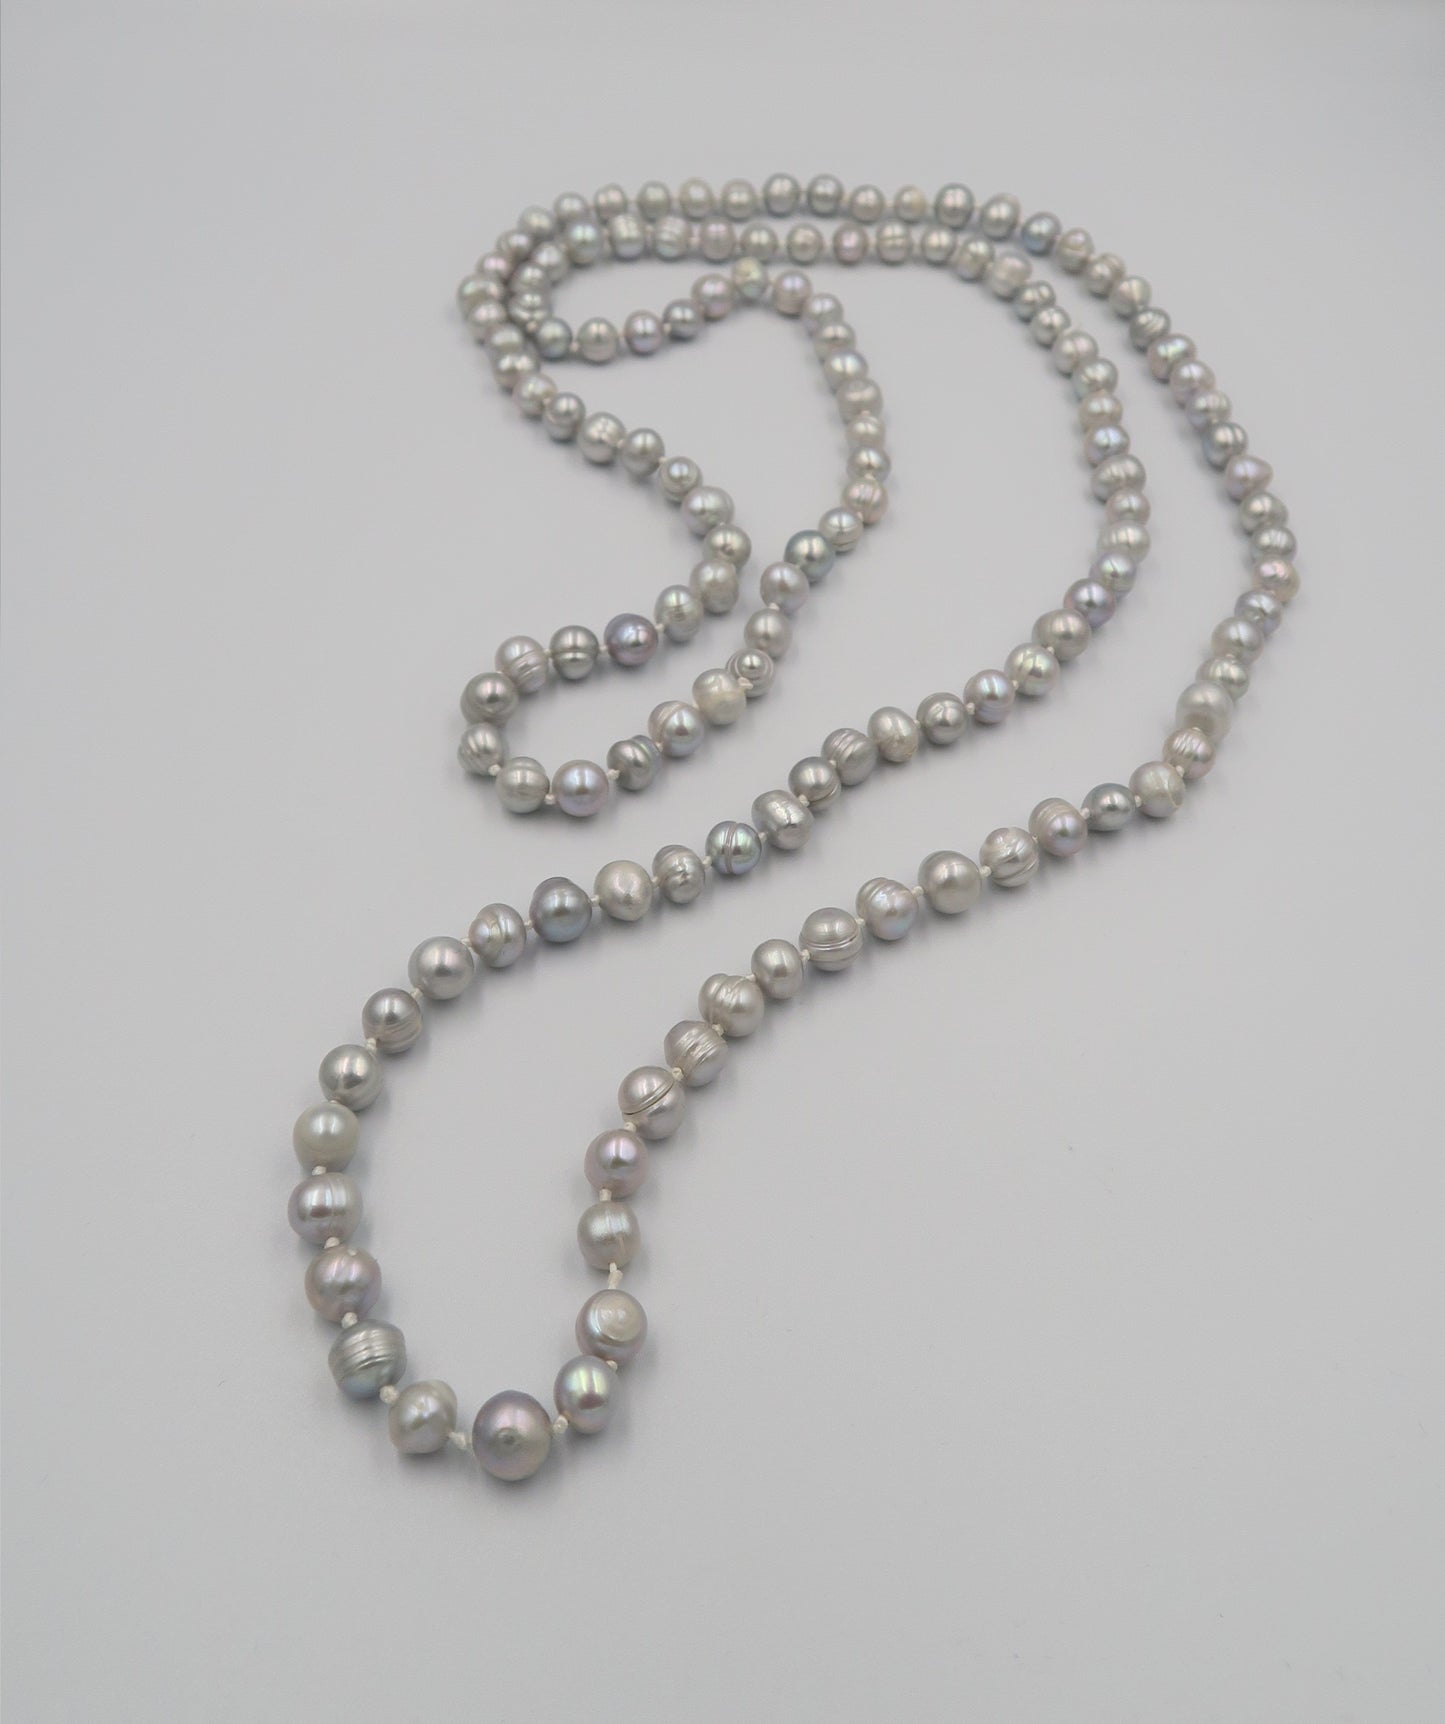 PL - 120cm Real Fresh Water Pearl 925 Silver Necklace Grey Ring Baroque shape Pearl Gift Box Celeste